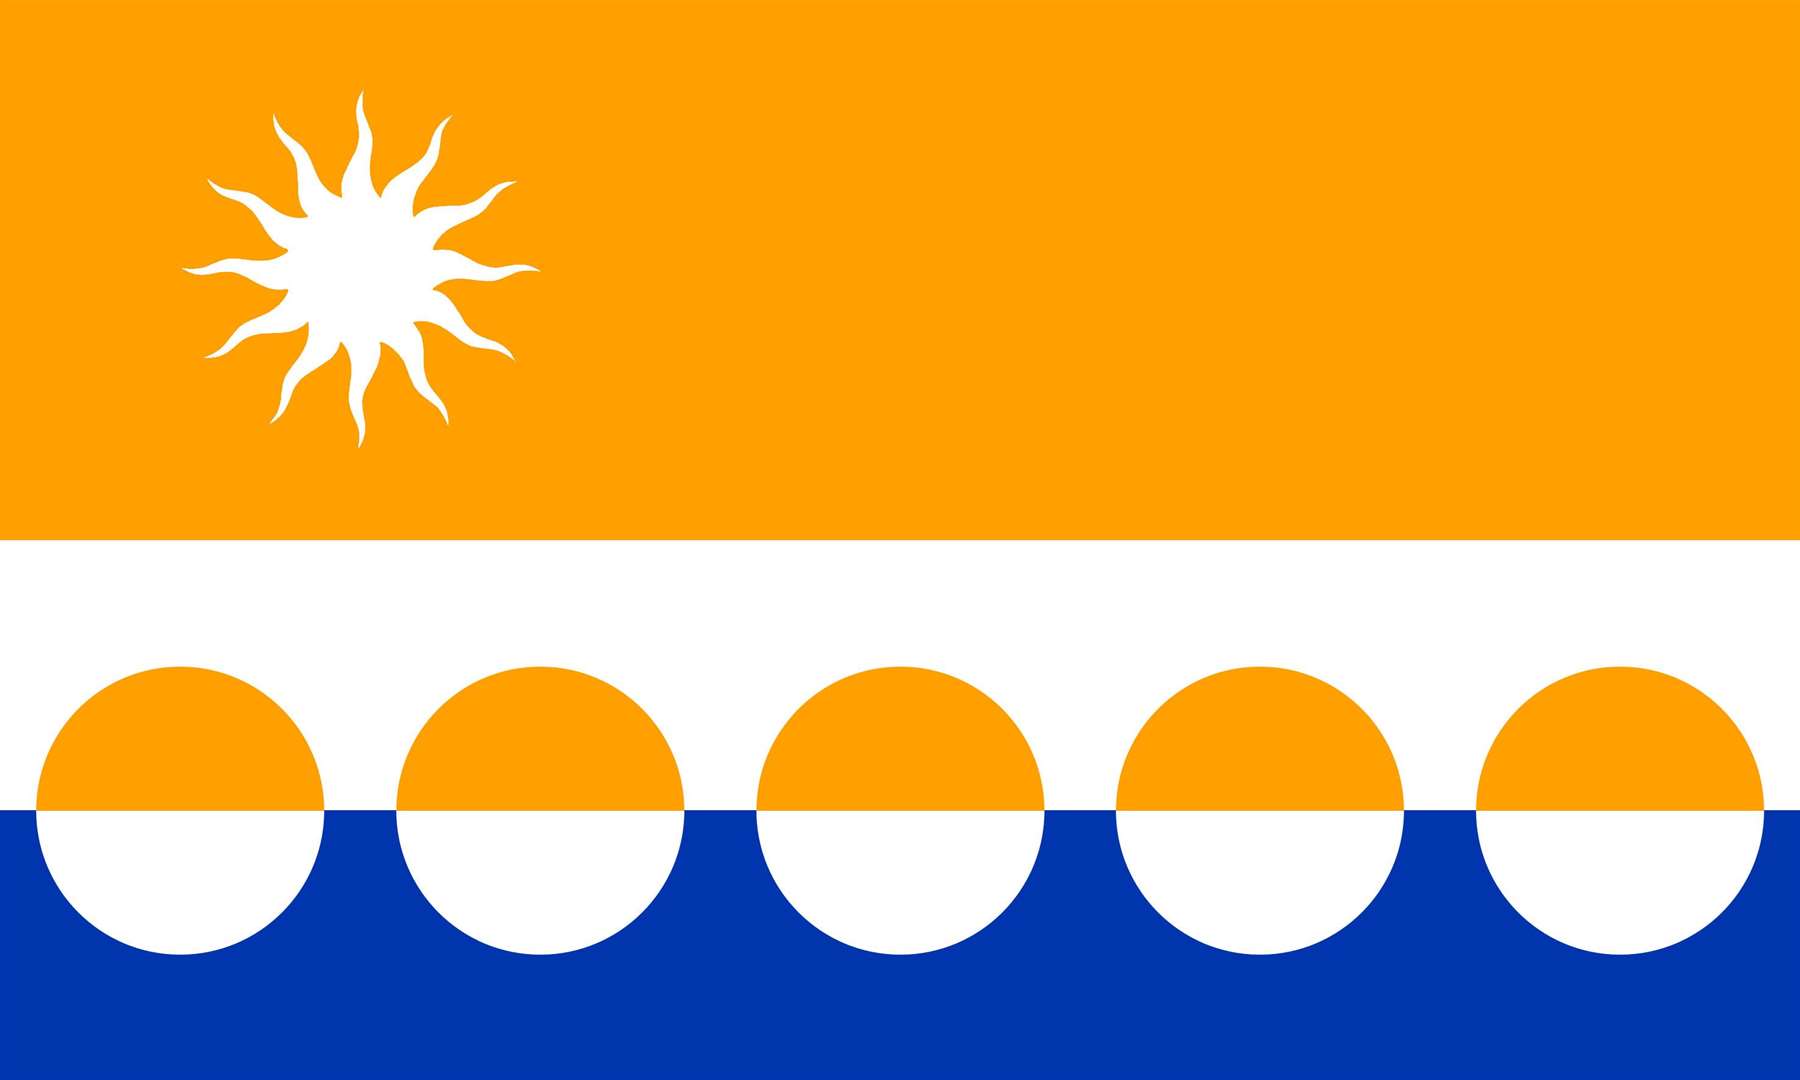 The white horizontal band recalls the bridges that are emblematic of the county. The blue colour can represent both the rivers and the sea, while the golden-orange below the bridge represents the whisky made from the county's waters and above the bridge the sun symbolises the natural sunsets and agriculture.